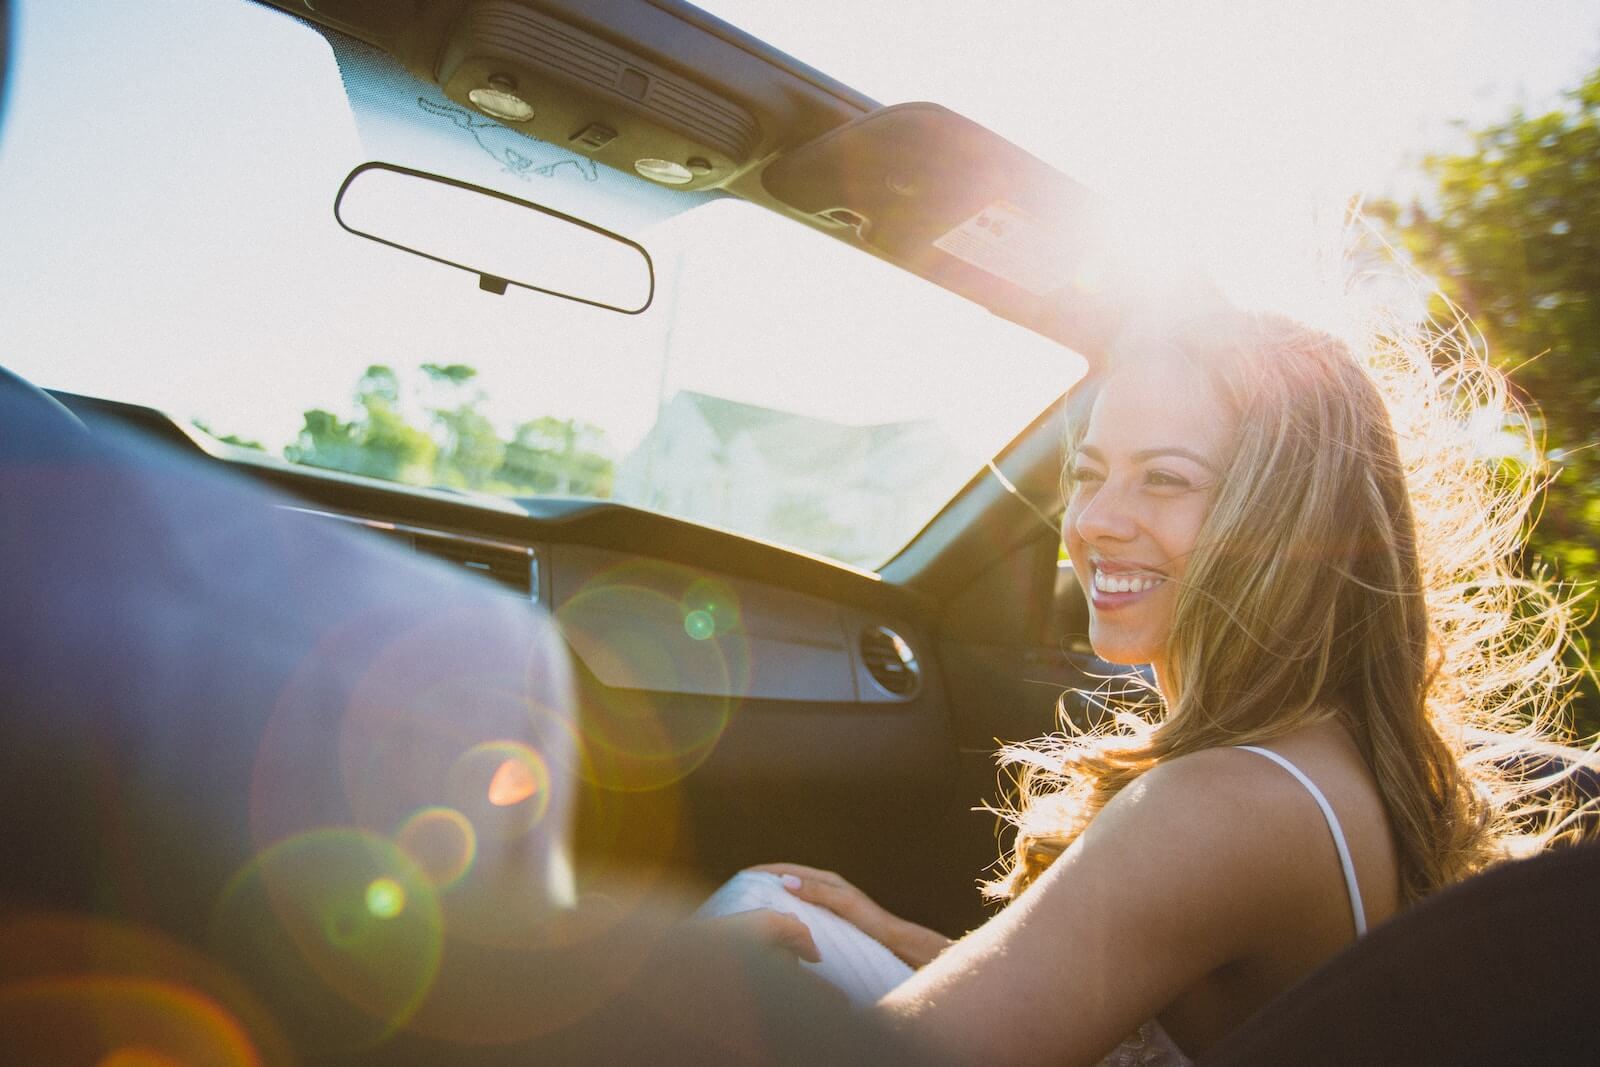 Smiling woman sitting inside a convertible car